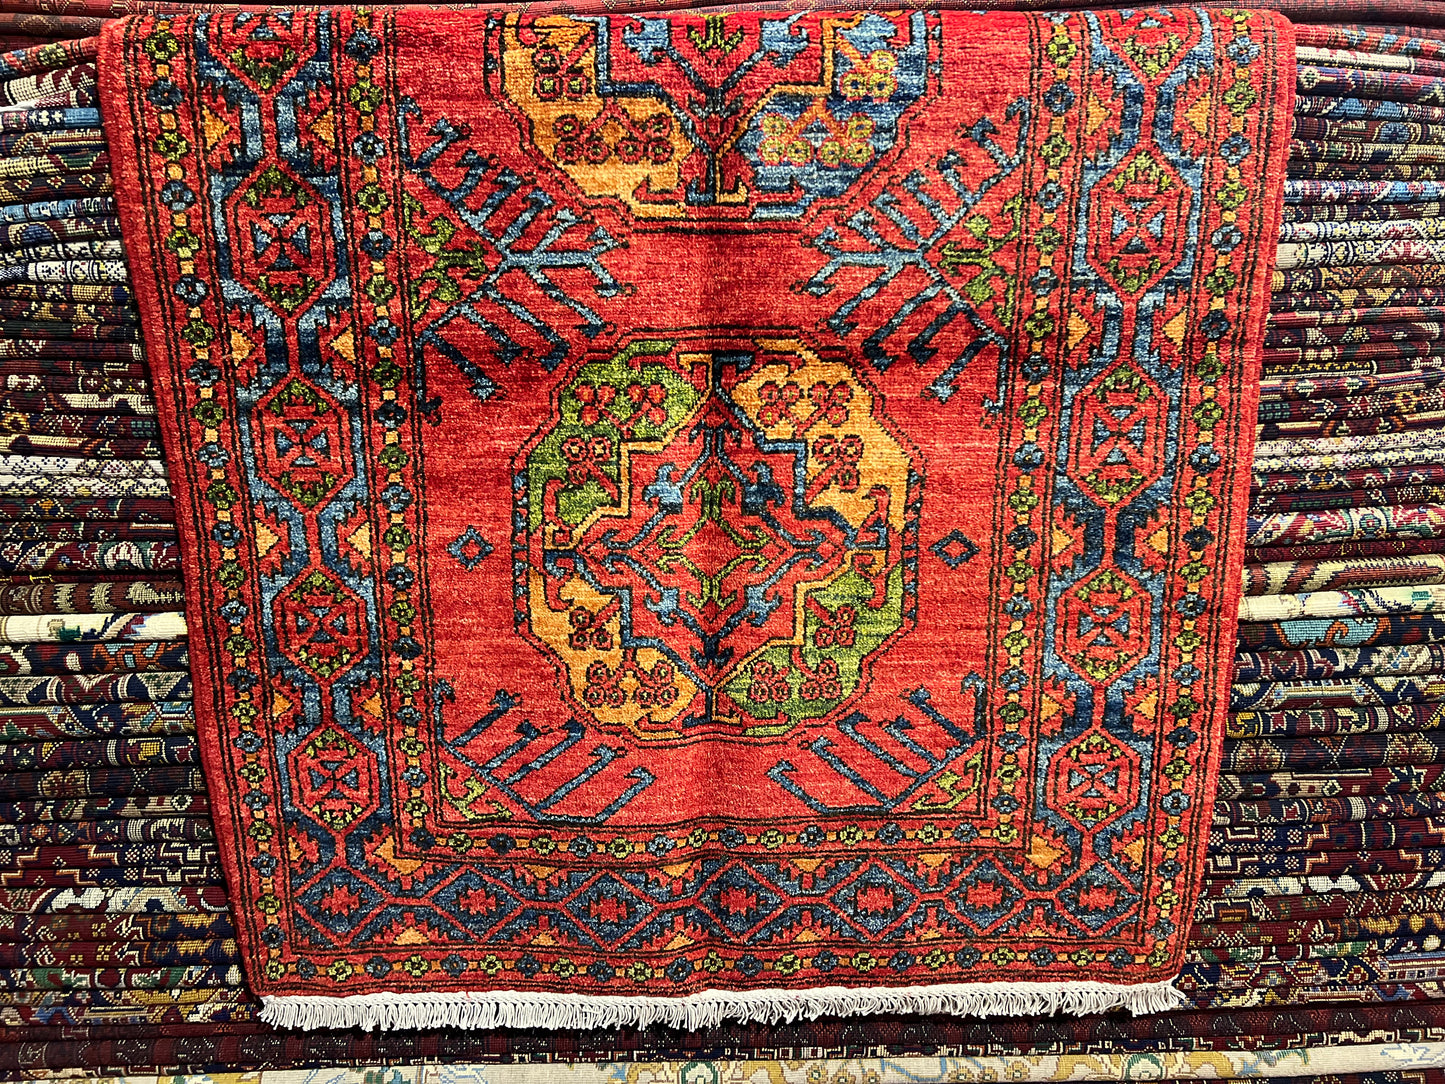 Afghan Hand Knitted/Knotted Living / Dining Room Wool Woven Rug Size 5ft x 3ft ( FP-M-5X3-O-N) Marinous FeelPai (Elephant Foot) - Kabul Rugs